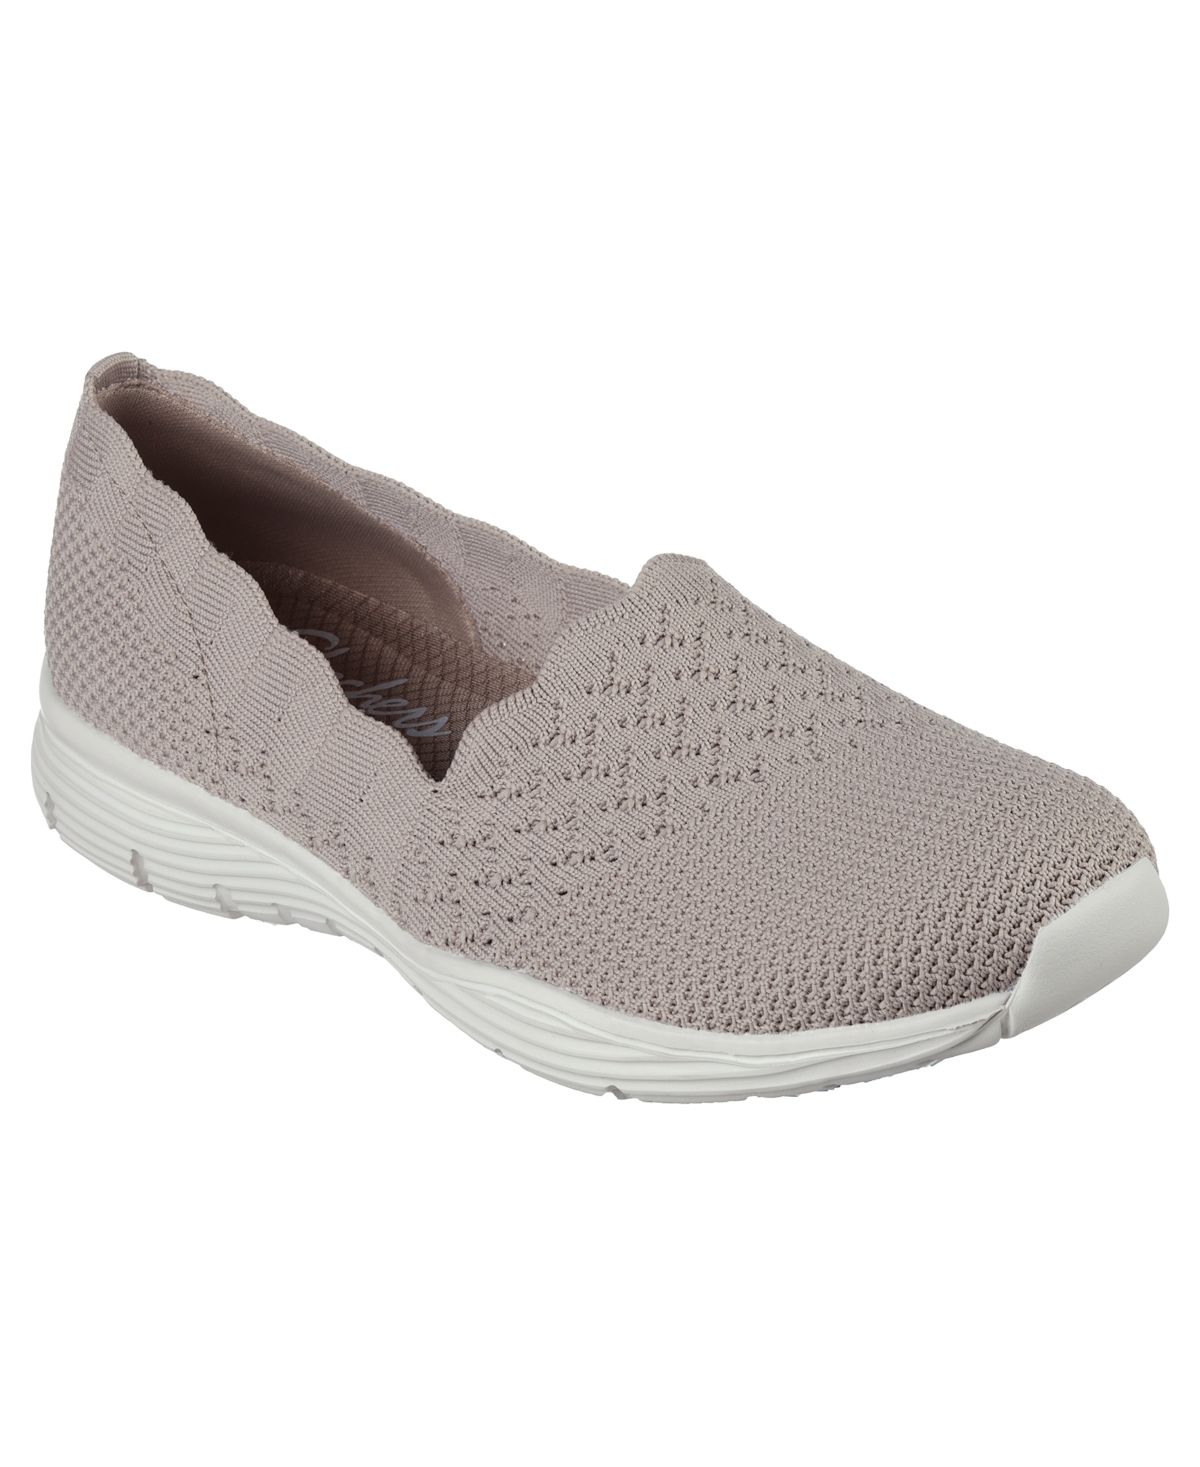 Seager - Stat Slip-On Casual Sneakers from Finish Line - Taupe